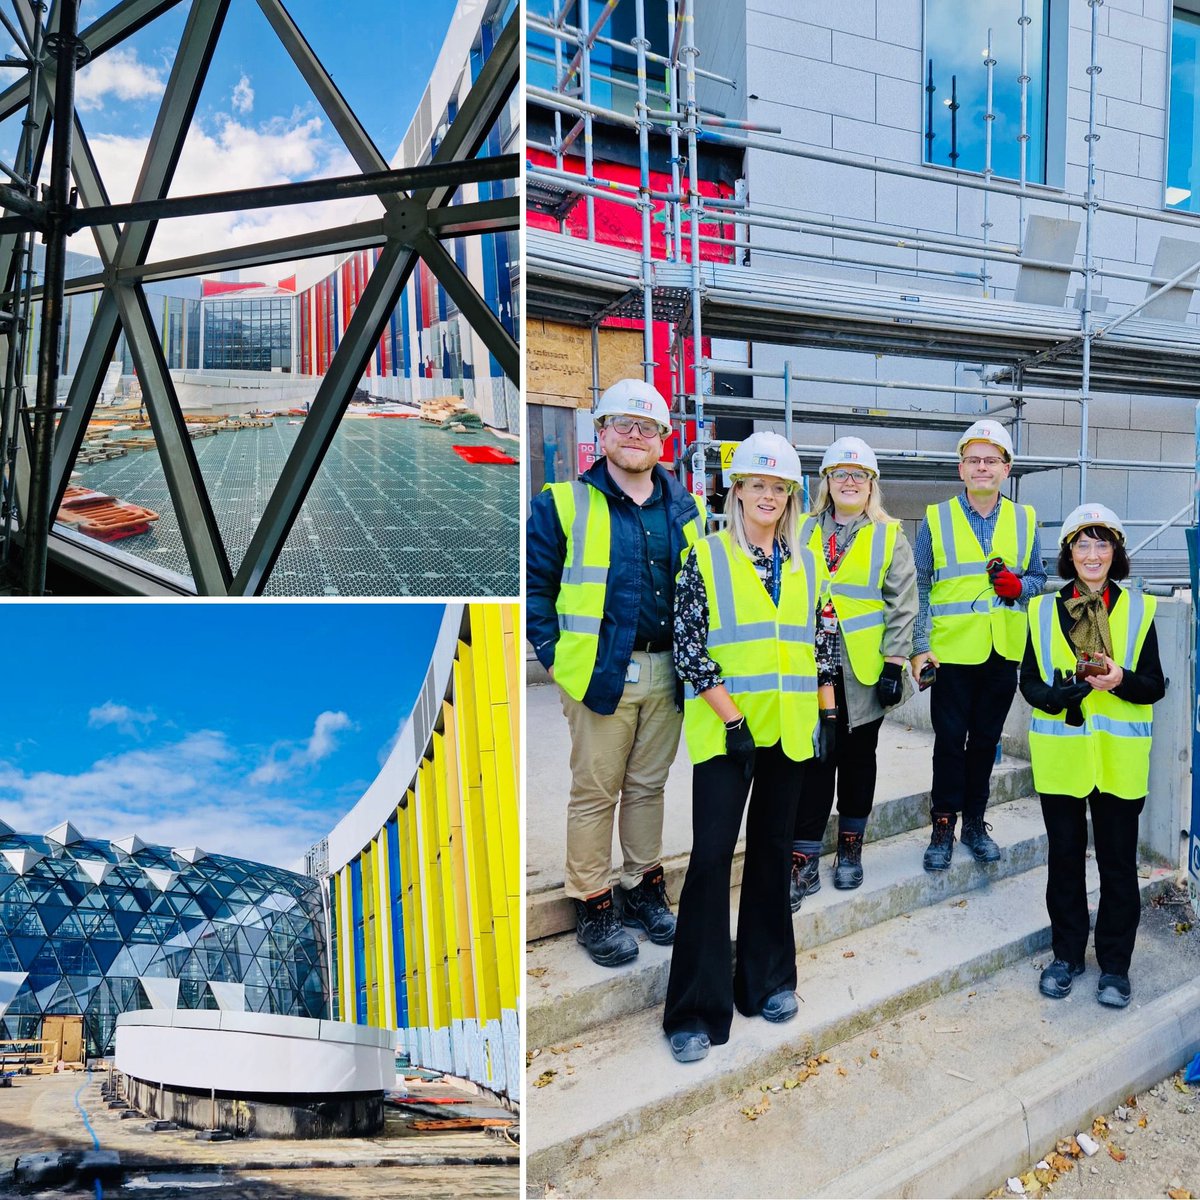 The sky's the limit today!! Feeling excited about the future @CHI_Ireland after a tour of the New Children's Hospital 🏥☀️ @CeoHardiman @fionnatb @blaizewhelan @nisalolan